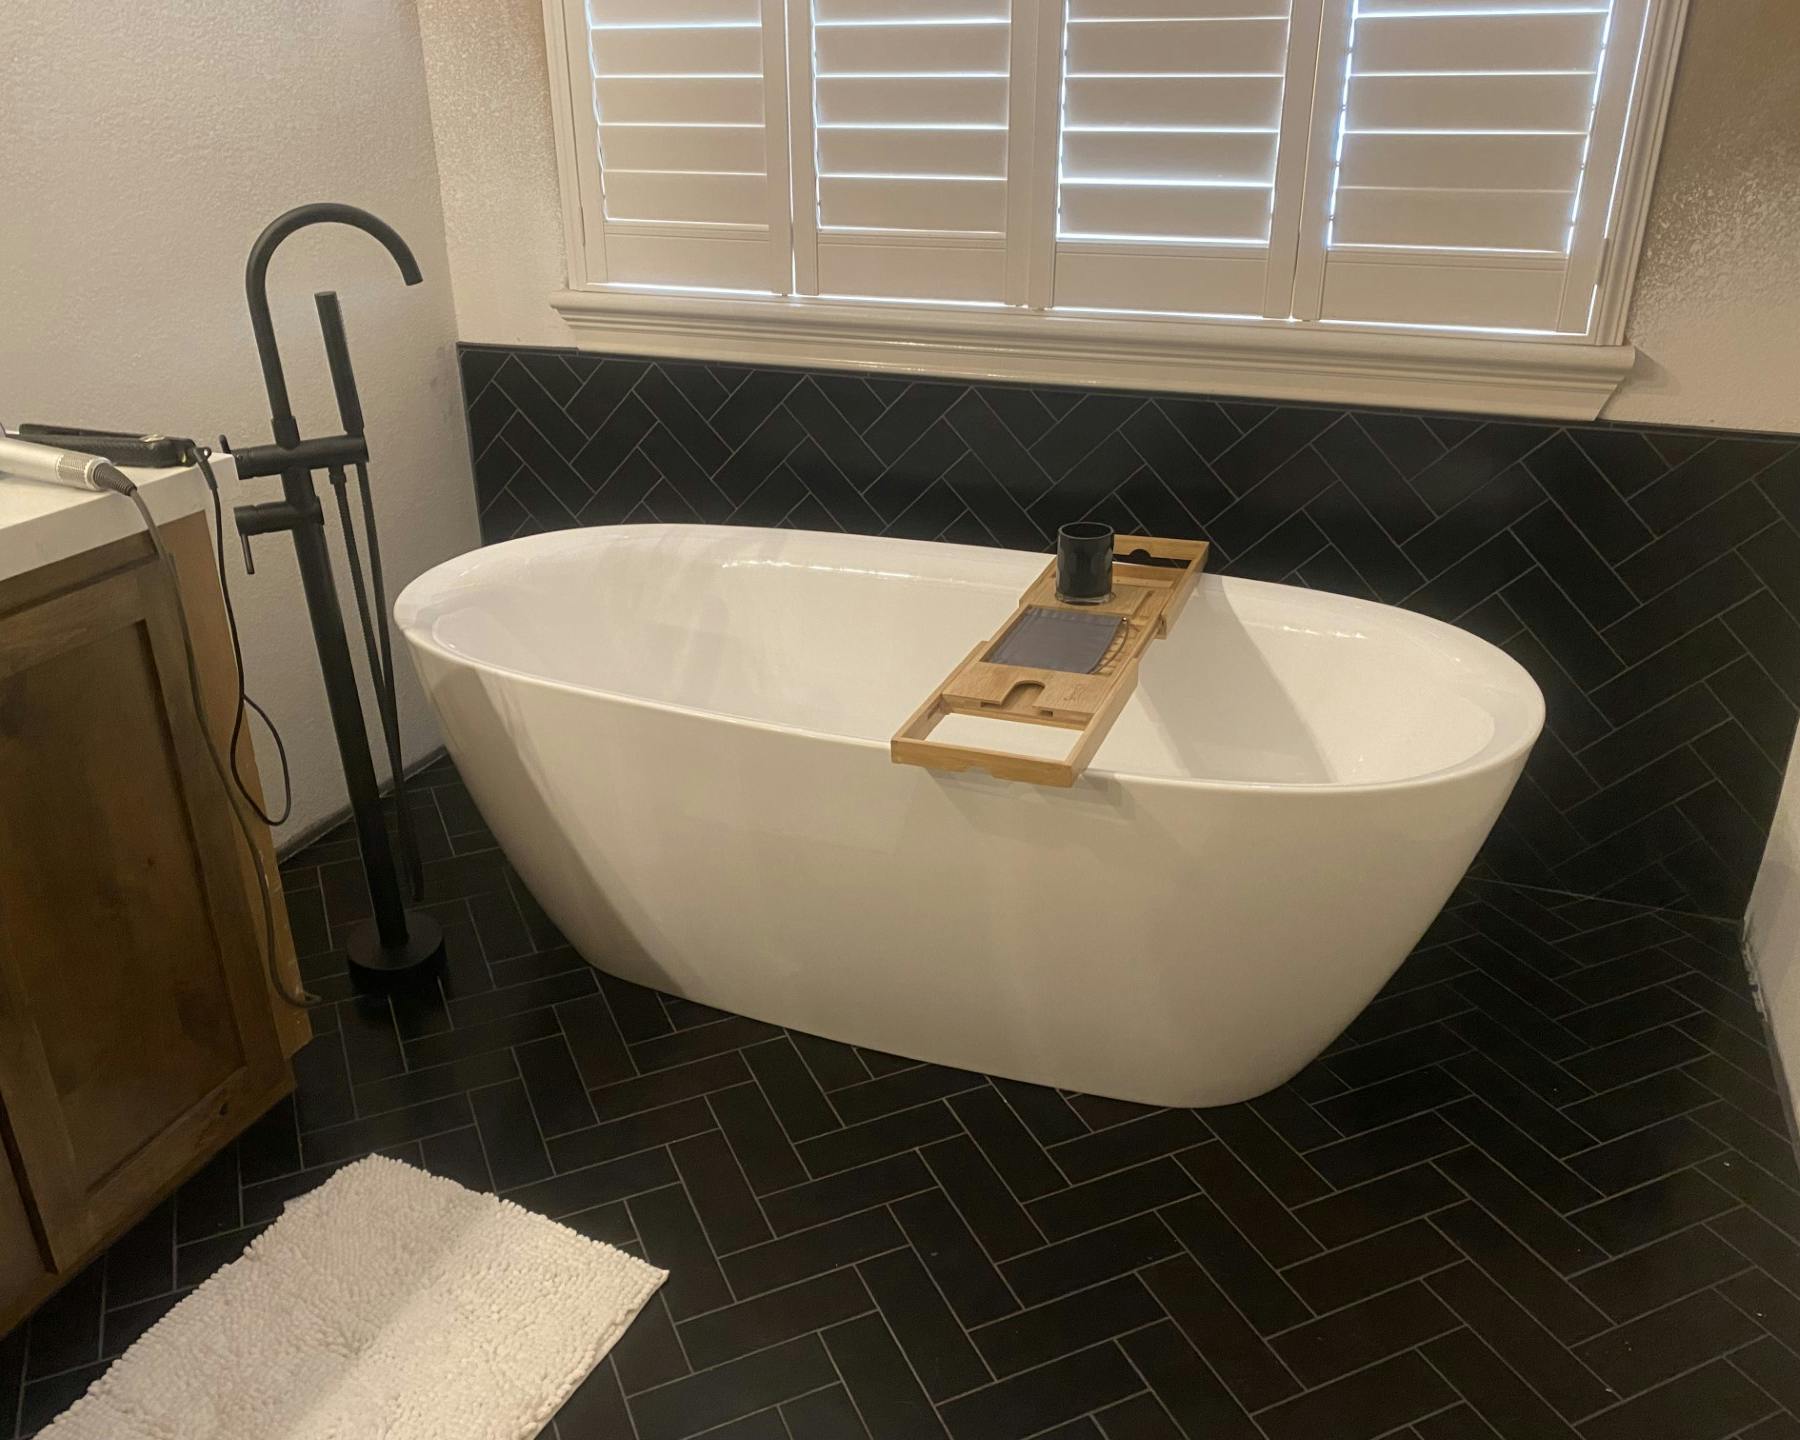 "A contemporary bathroom showcasing a white freestanding bathtub beside a window with white horizontal blinds. On the tub, a wooden bath tray holds a dark mug. Adjacent to the tub is a dark floor-standing faucet. The lower half of the walls features black tiles with a diagonal design, complemented by a white wooden cabinet on the left. A soft white rug is spread on the floor.